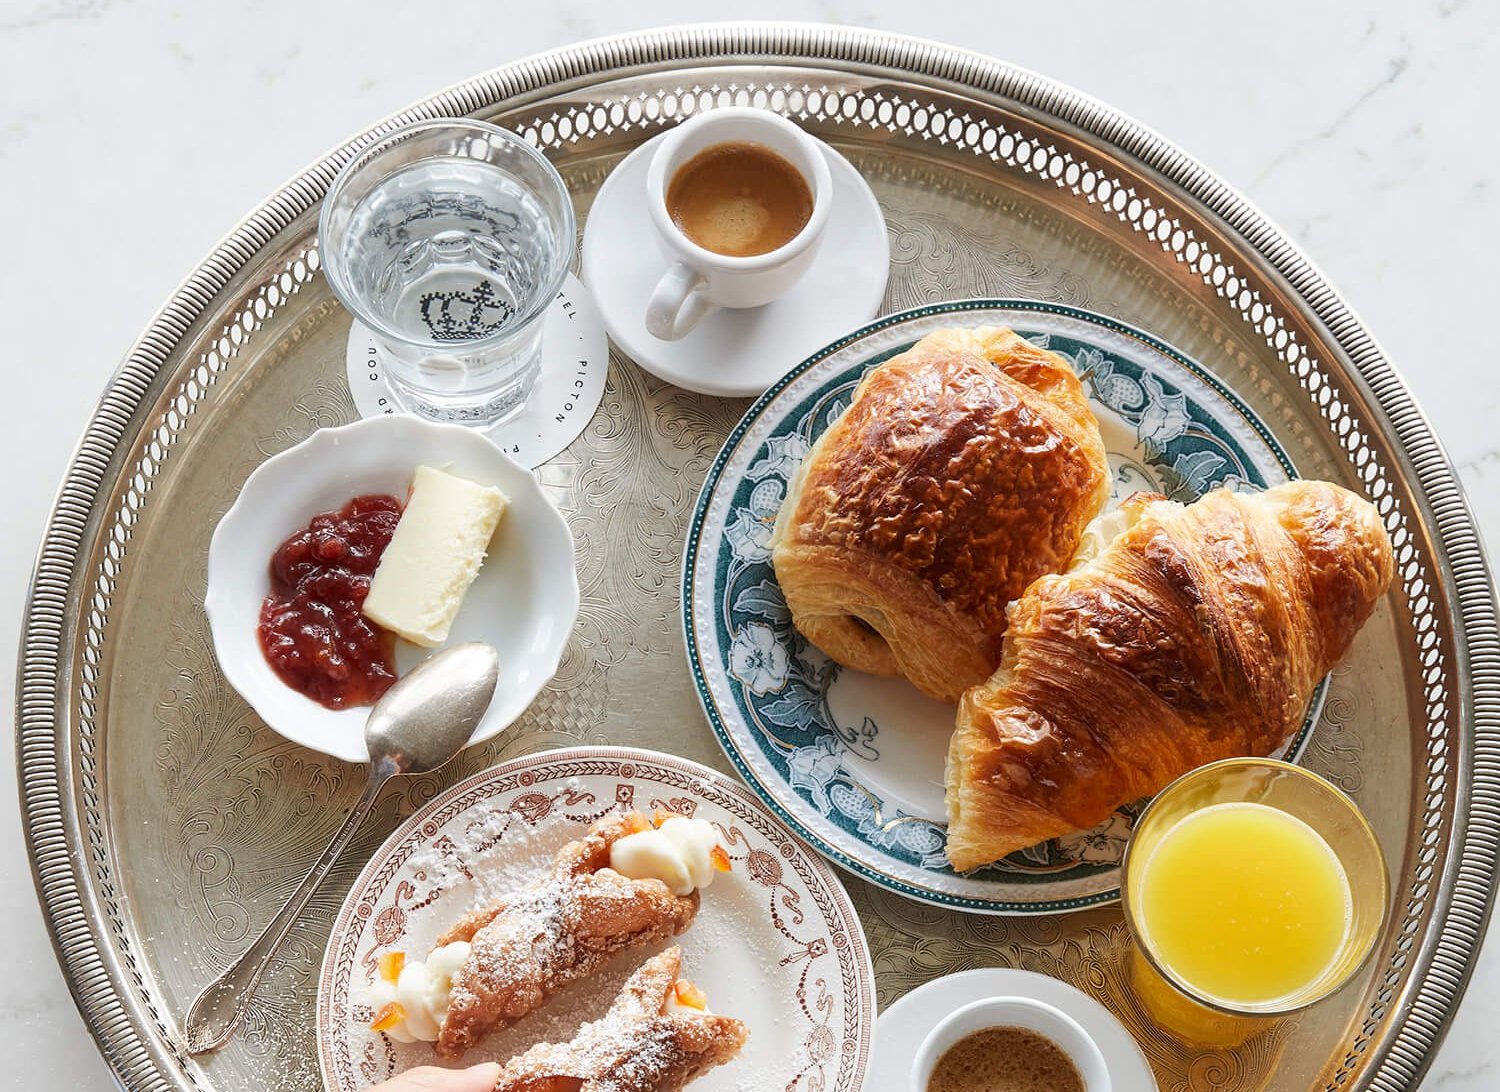 A silver tray laid with pastries, coffee and juice